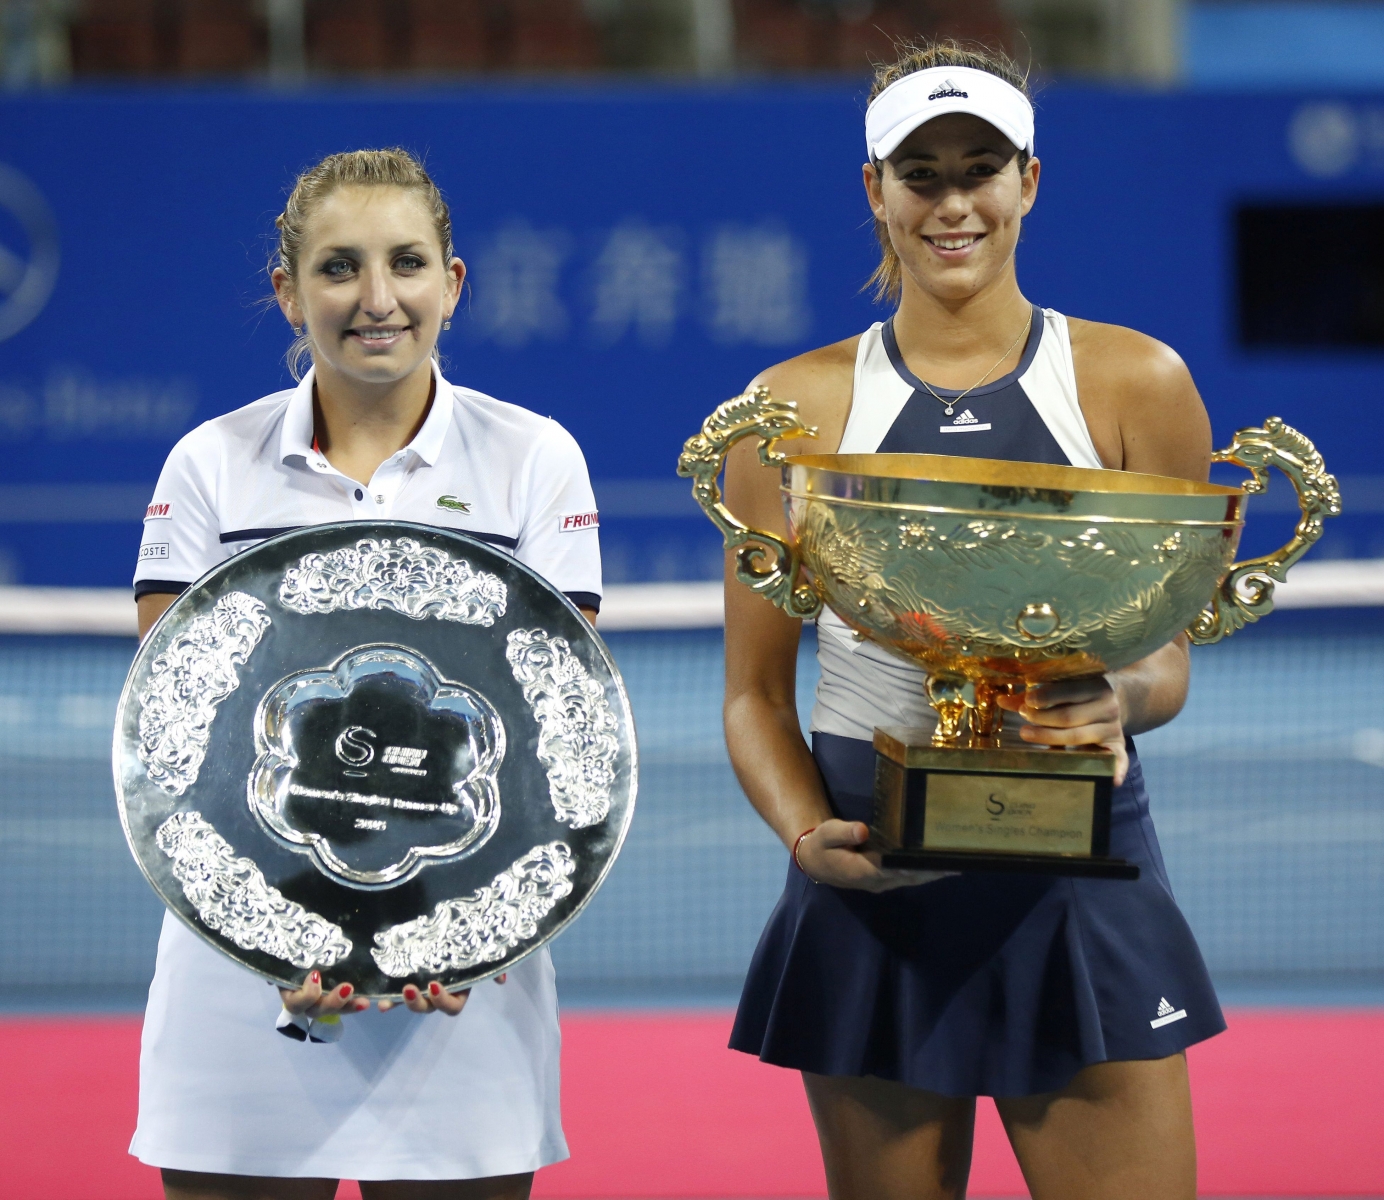 epa04973146 Winner Garbine Muguruza (R) of Spain and runner up Timea Bacsinszky of Switzerland pose with their trophies during the awarding ceremony of the women's singles final match for the China Open tennis tournament at the National Tennis Center in Beijing, China, 11 October 2015.  EPA/WU HONG